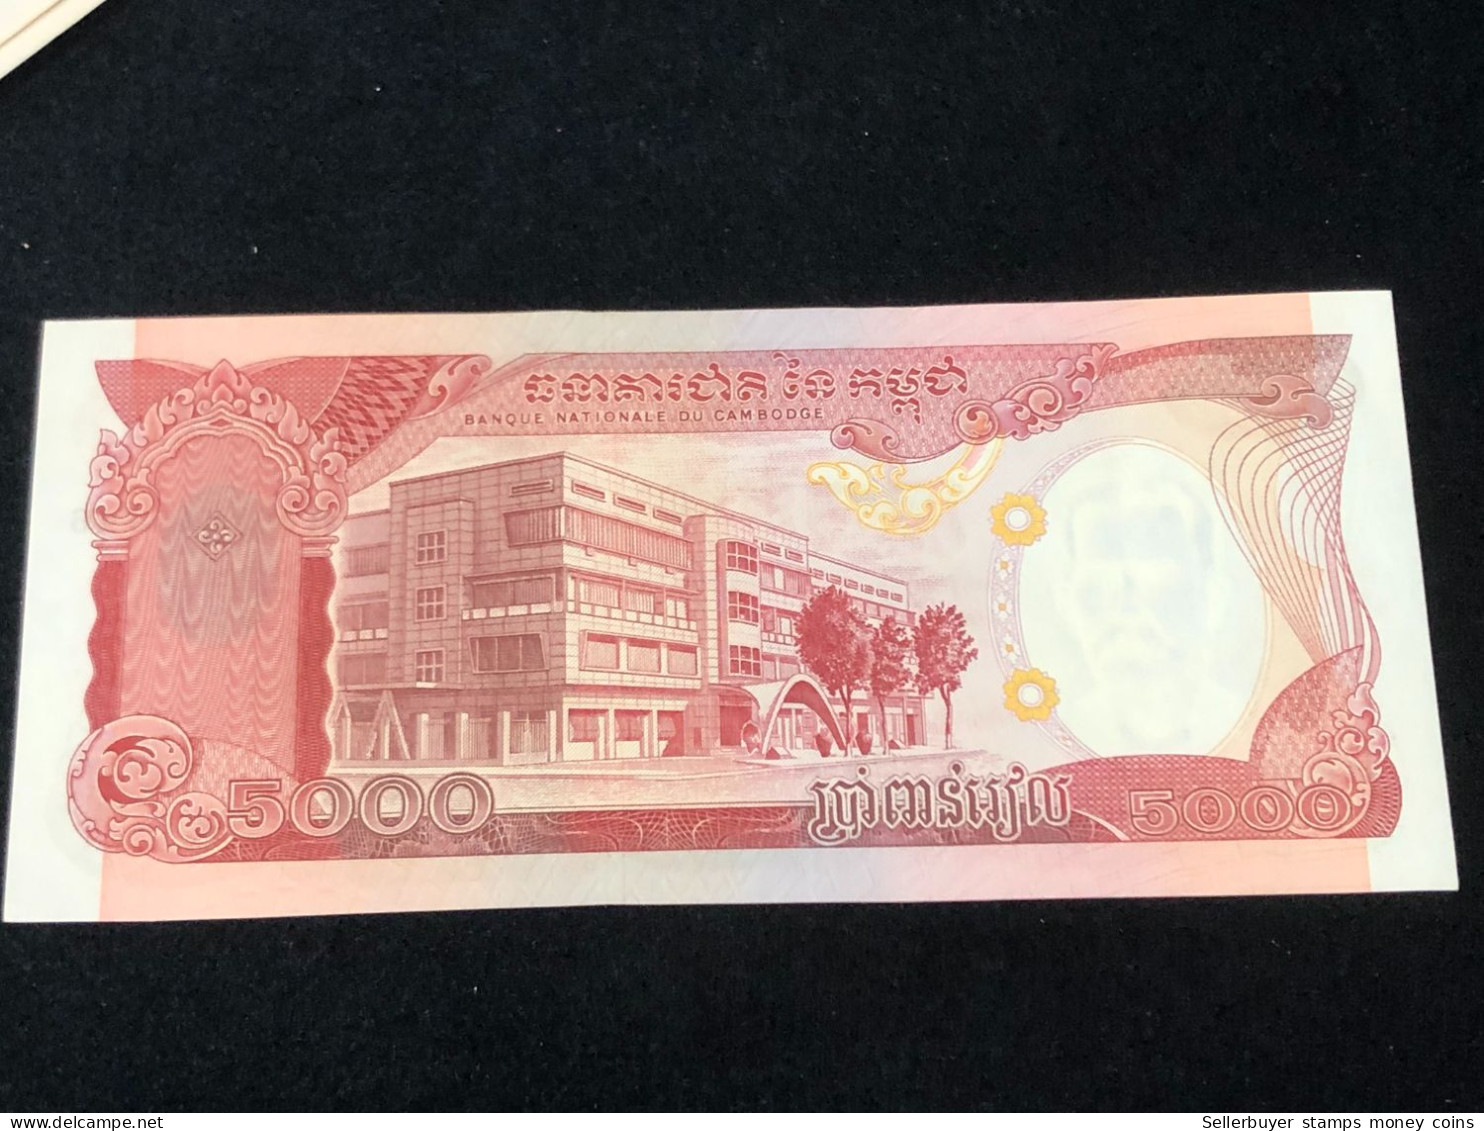 Cambodia Banknotes Bank Of Kampuchea 1975 Issue-replacement Note -1 Pcs Unc Very Rare - Cambodja